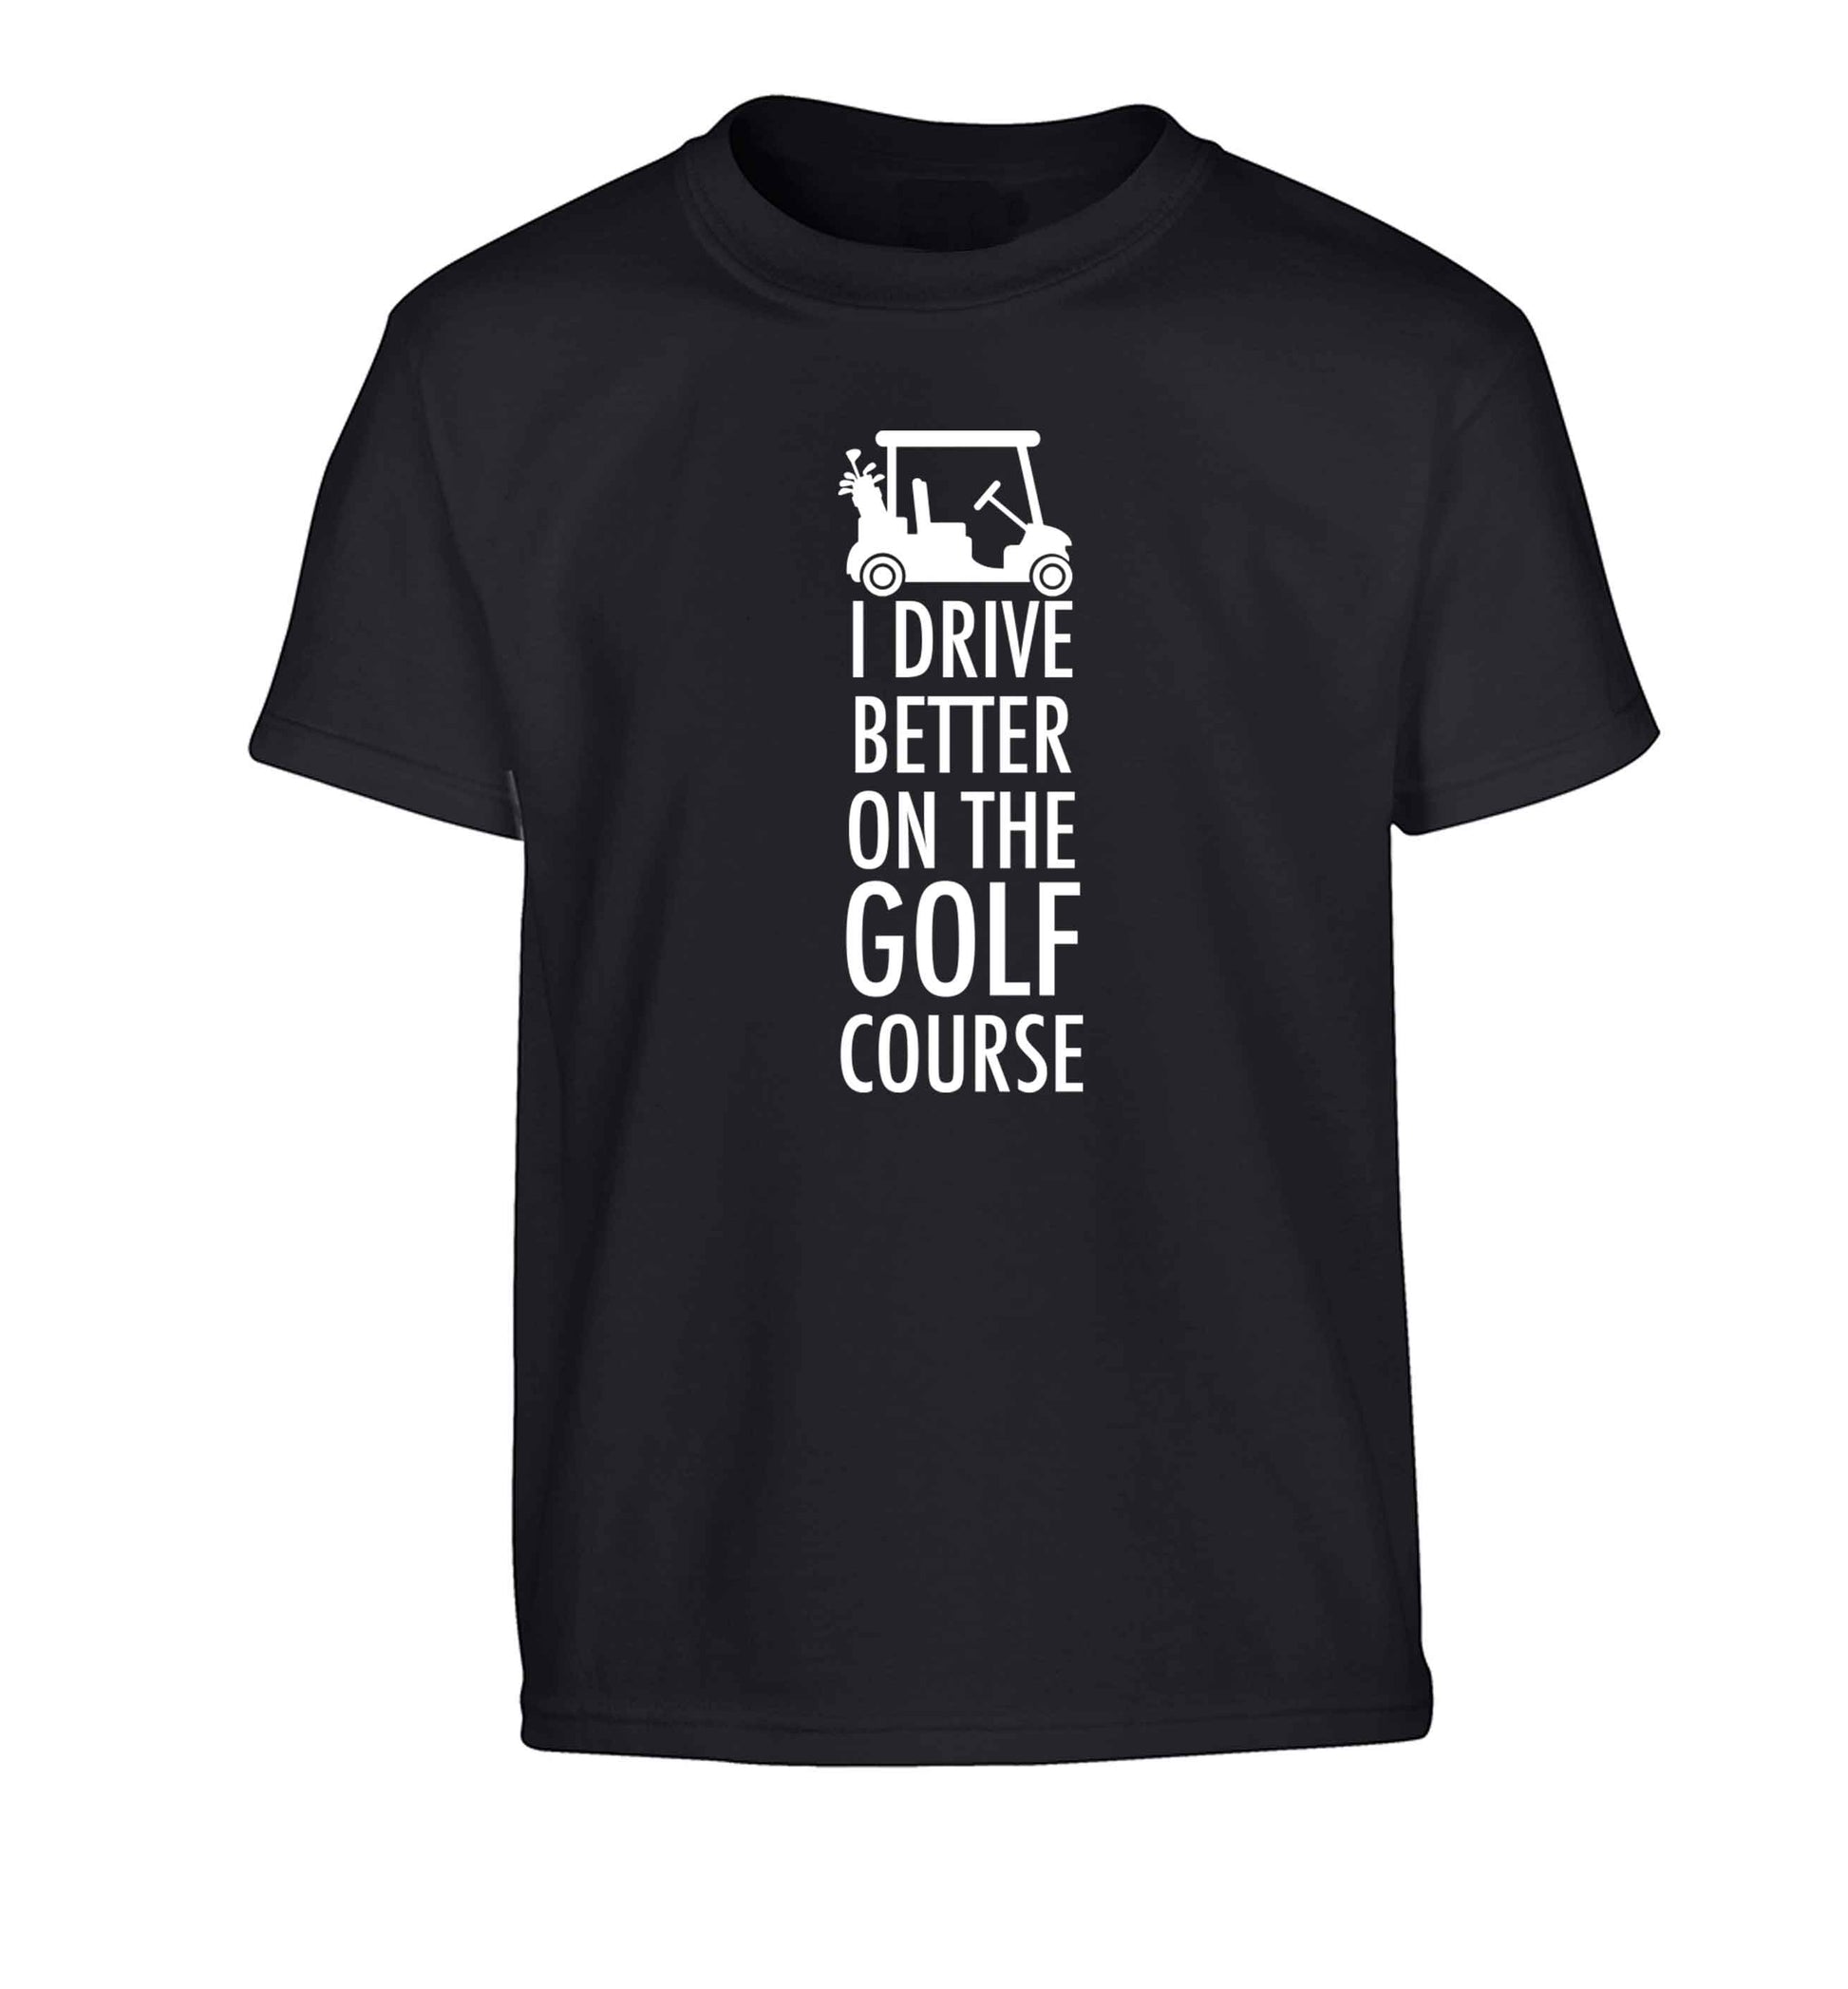 I drive better on the golf course Children's black Tshirt 12-13 Years